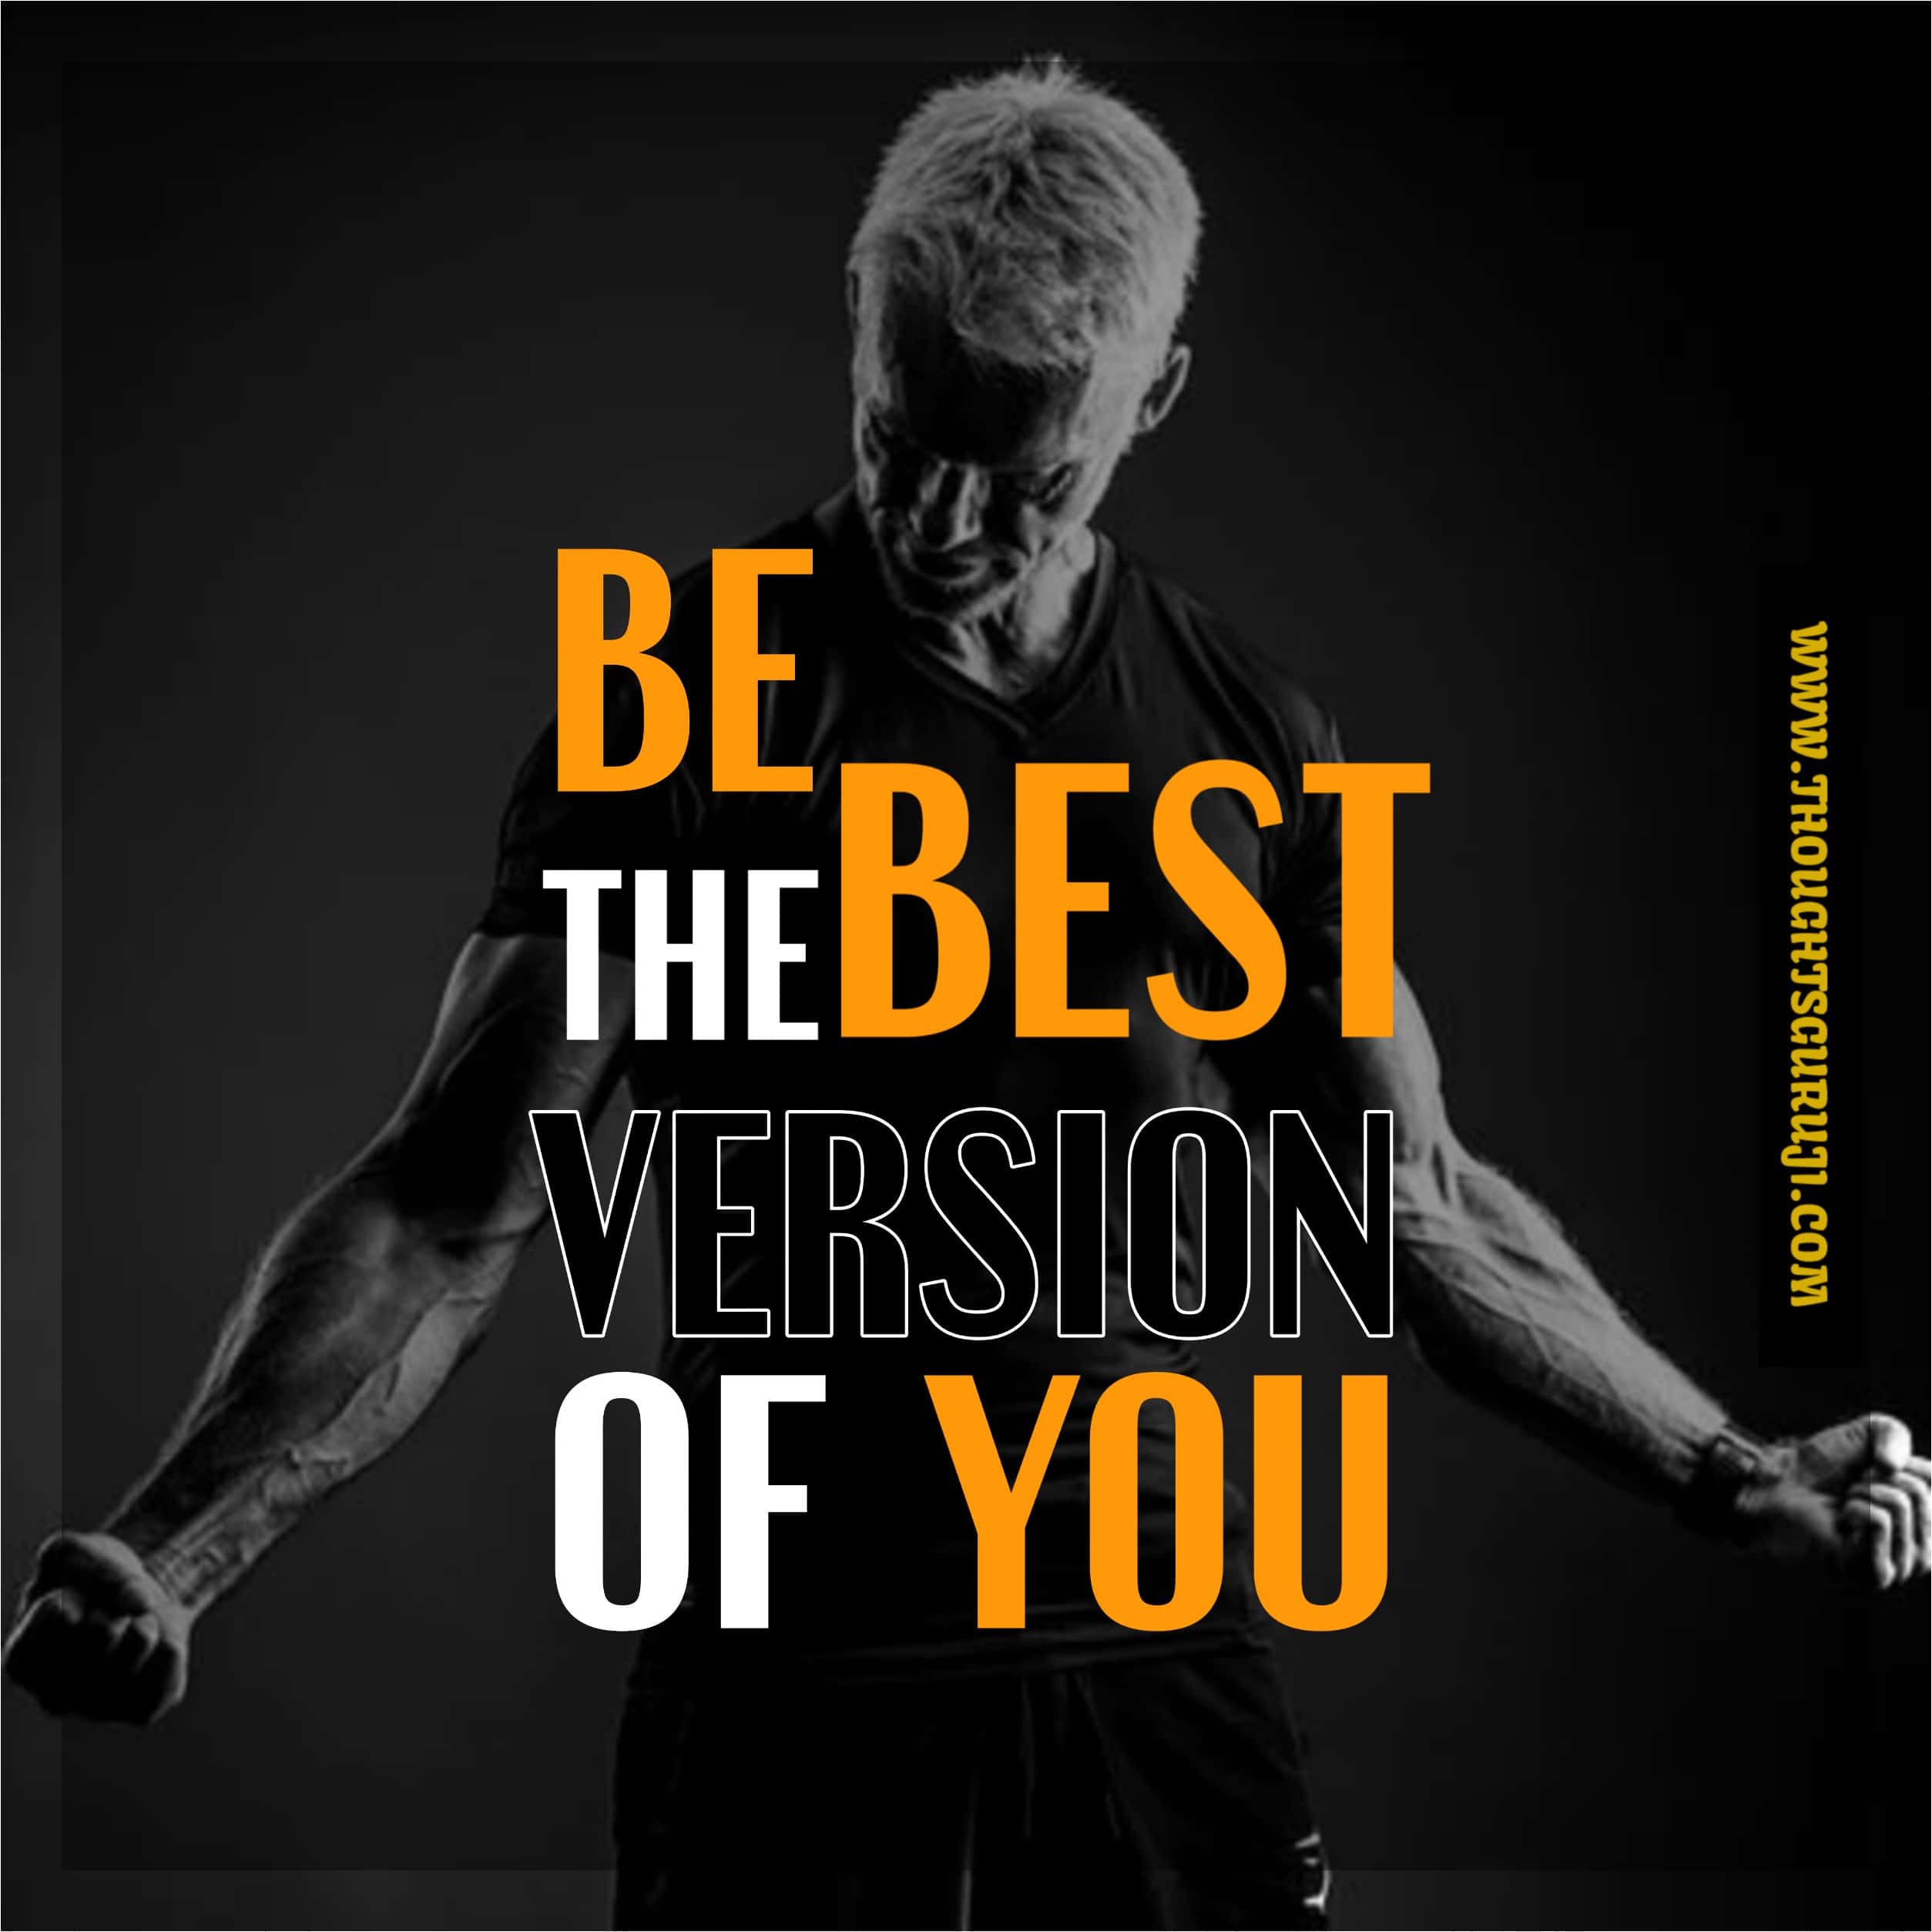 GYM Motivation Quotes And Fitness Workout Status With Images